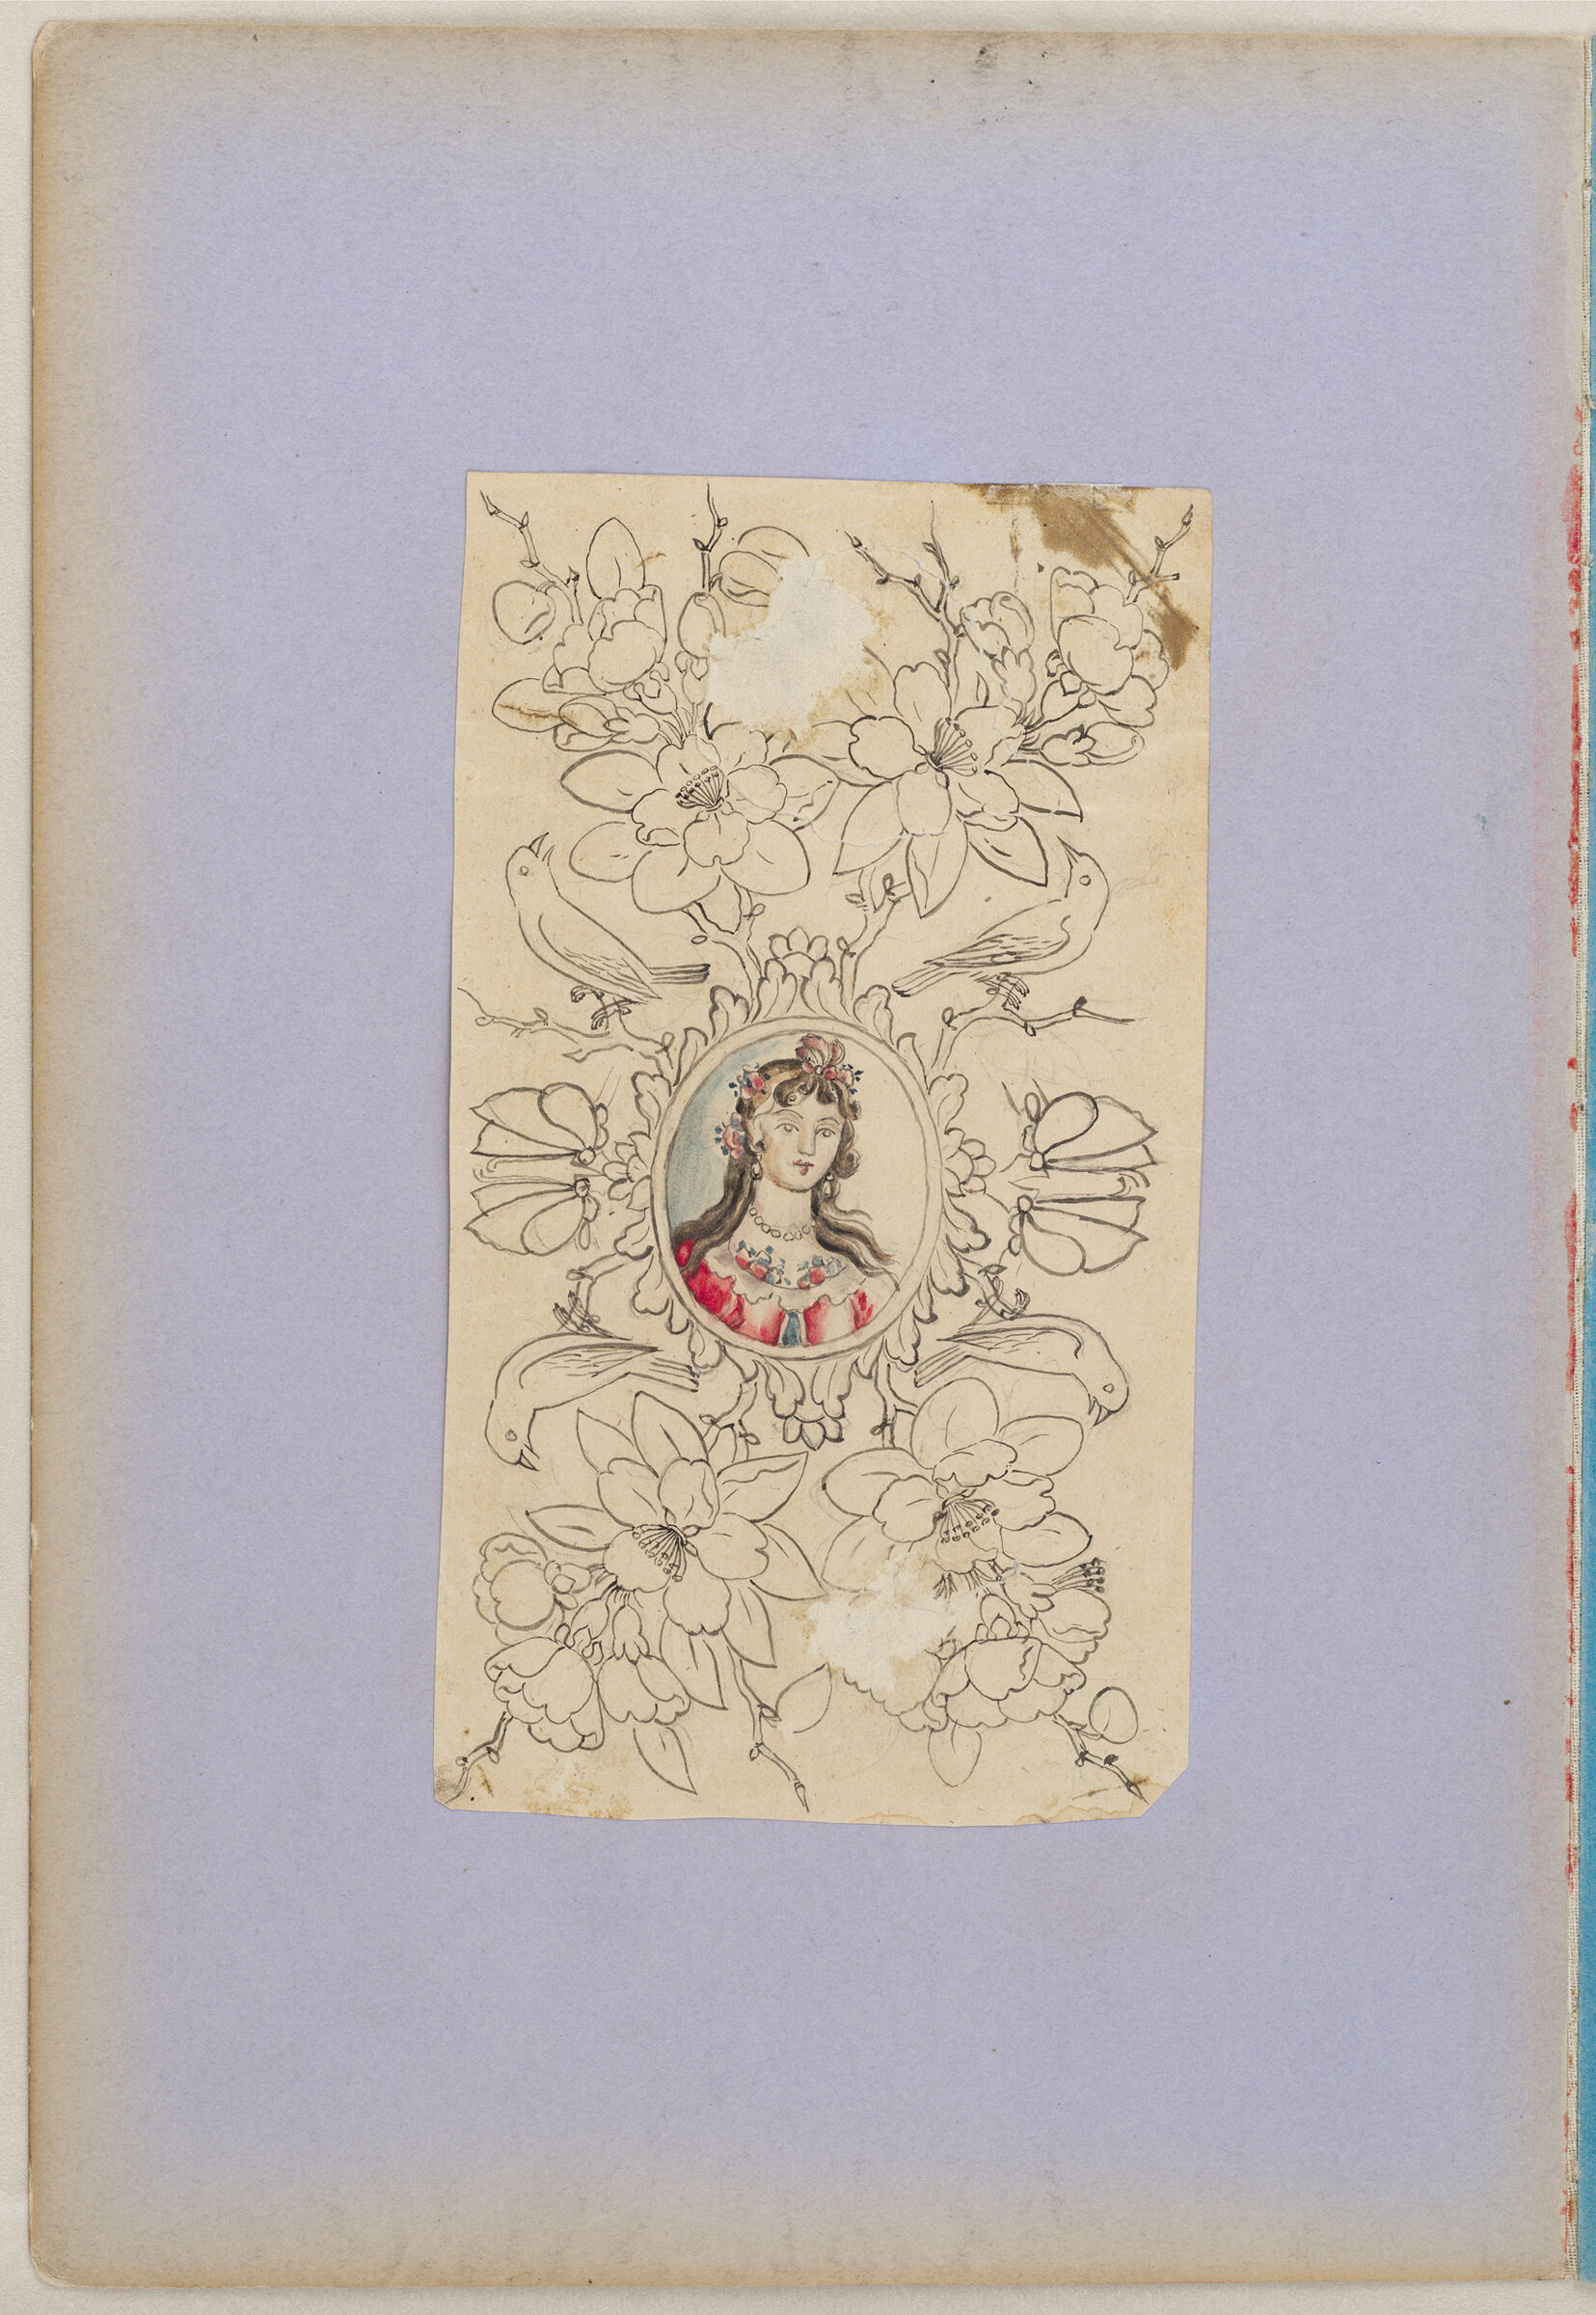 Folio 3 From An Album Of Artists' Drawings From Qajar Iran: Medallion With Portrait Bust Of A European Woman, Enclosed In Symmetrical Composition Of Scrollwork, Birds, Flowers, And Butterflies 
 (Recto); Hunter With Falcon, Hound, And Rifle (Verso)